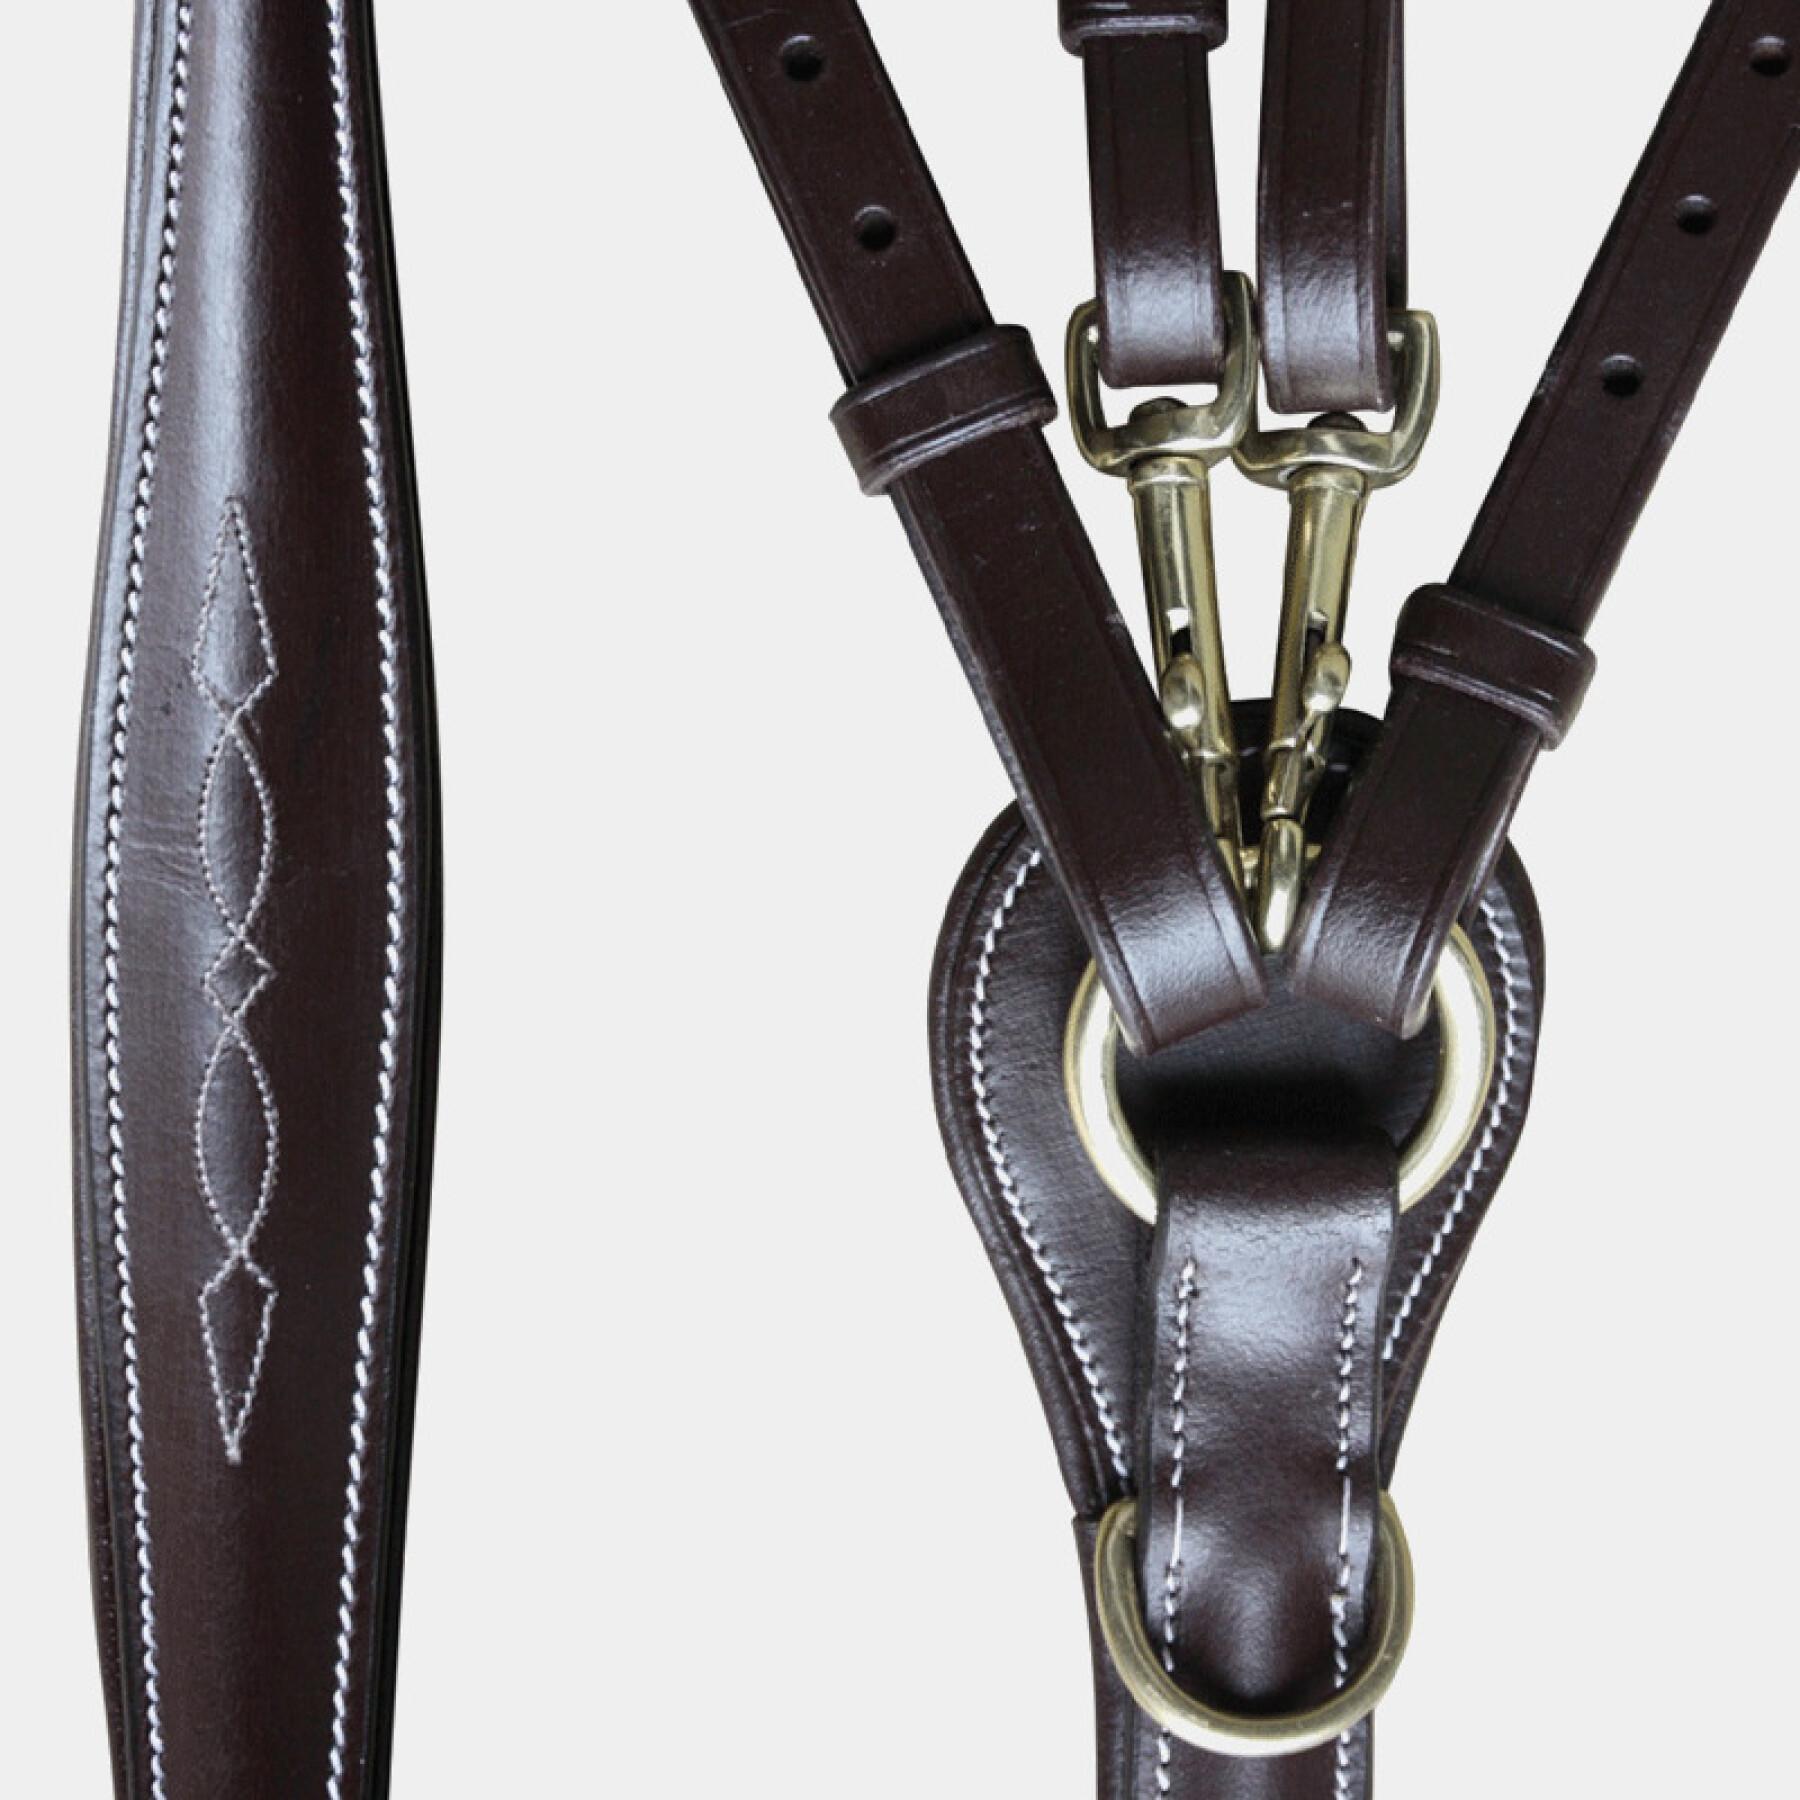 Jachthalsband voor paard met stiksels Canter